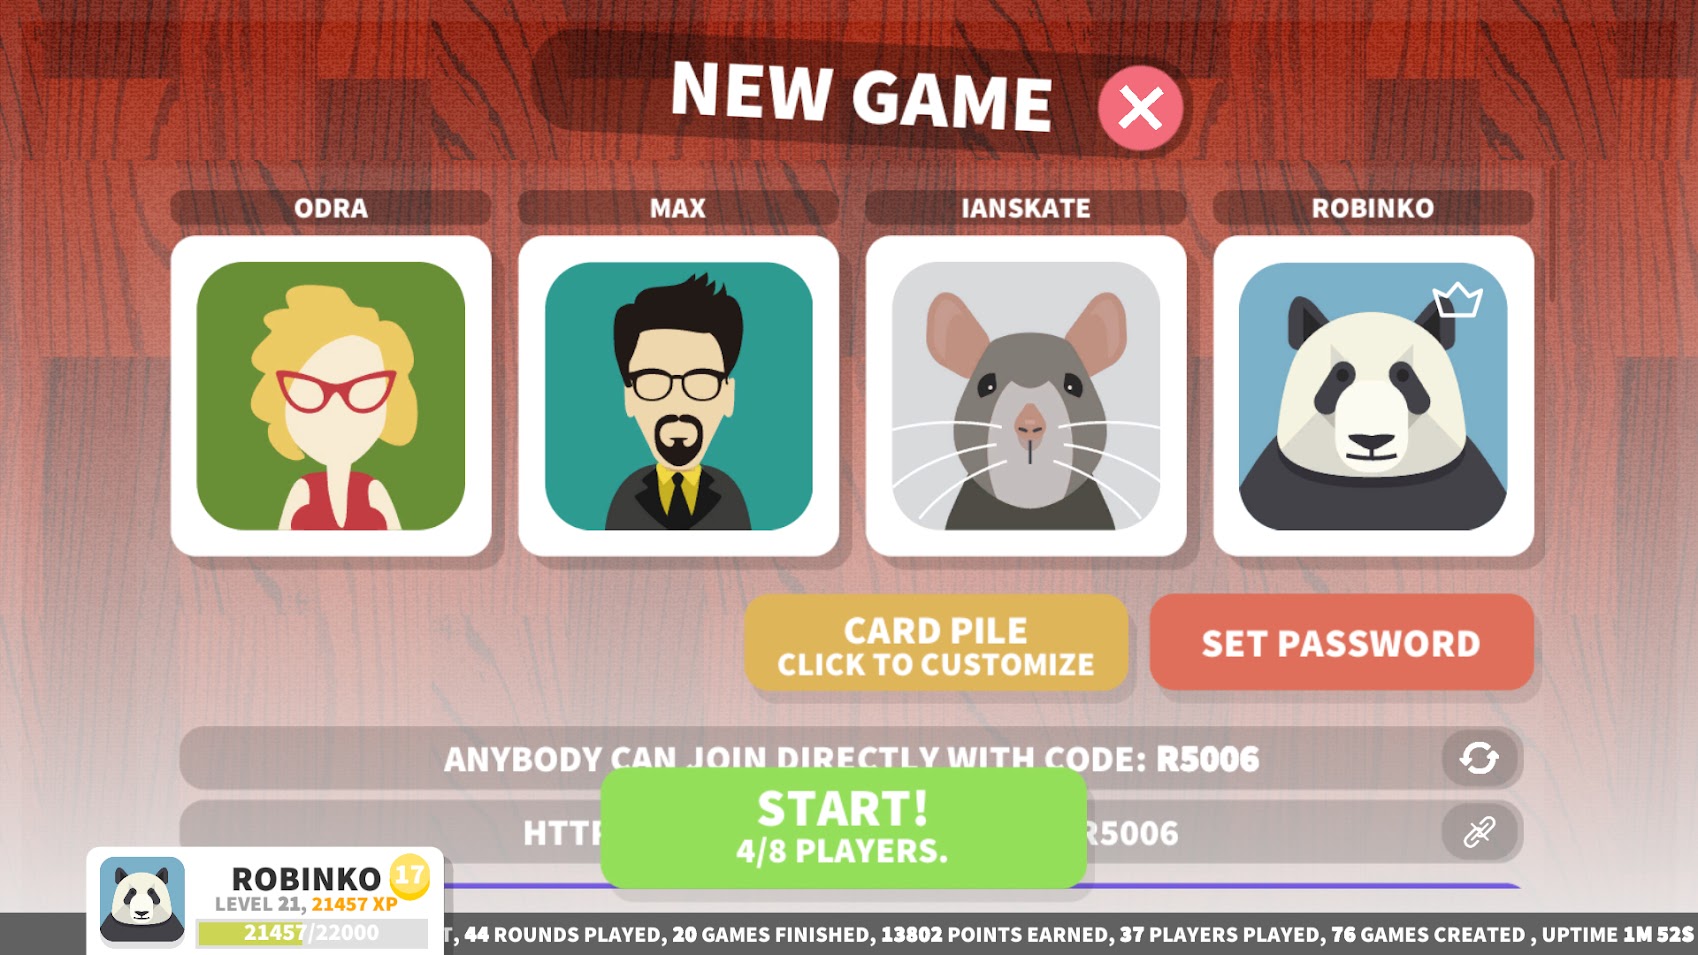 Duo With Friends - UNO Online Game by Blyster